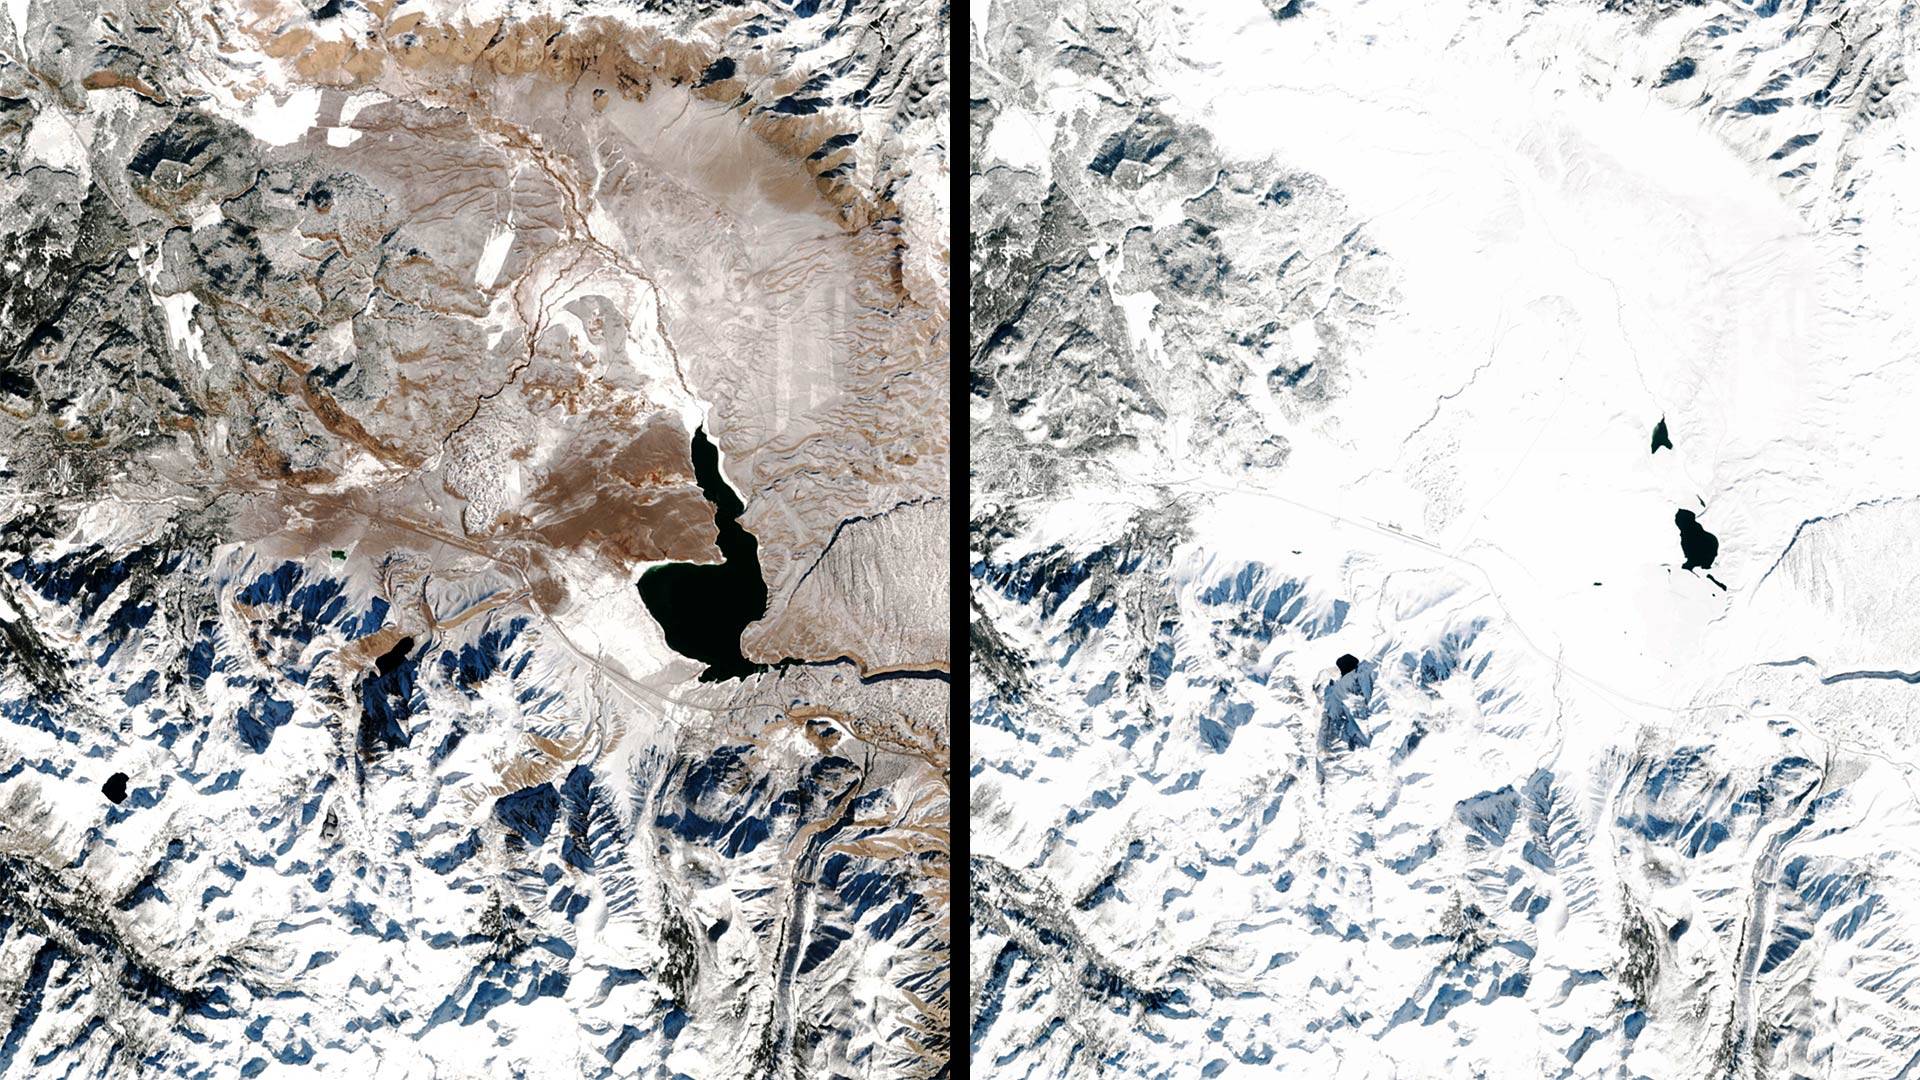 Before and after the snowstorms: Satellite images of Crowley Lake on Jan. 2, 2019 and Jan 30, 2019, after the Sierra Nevada was pummeled with snow. Courtesy <a href="https://www.planet.com/">Planet</a>